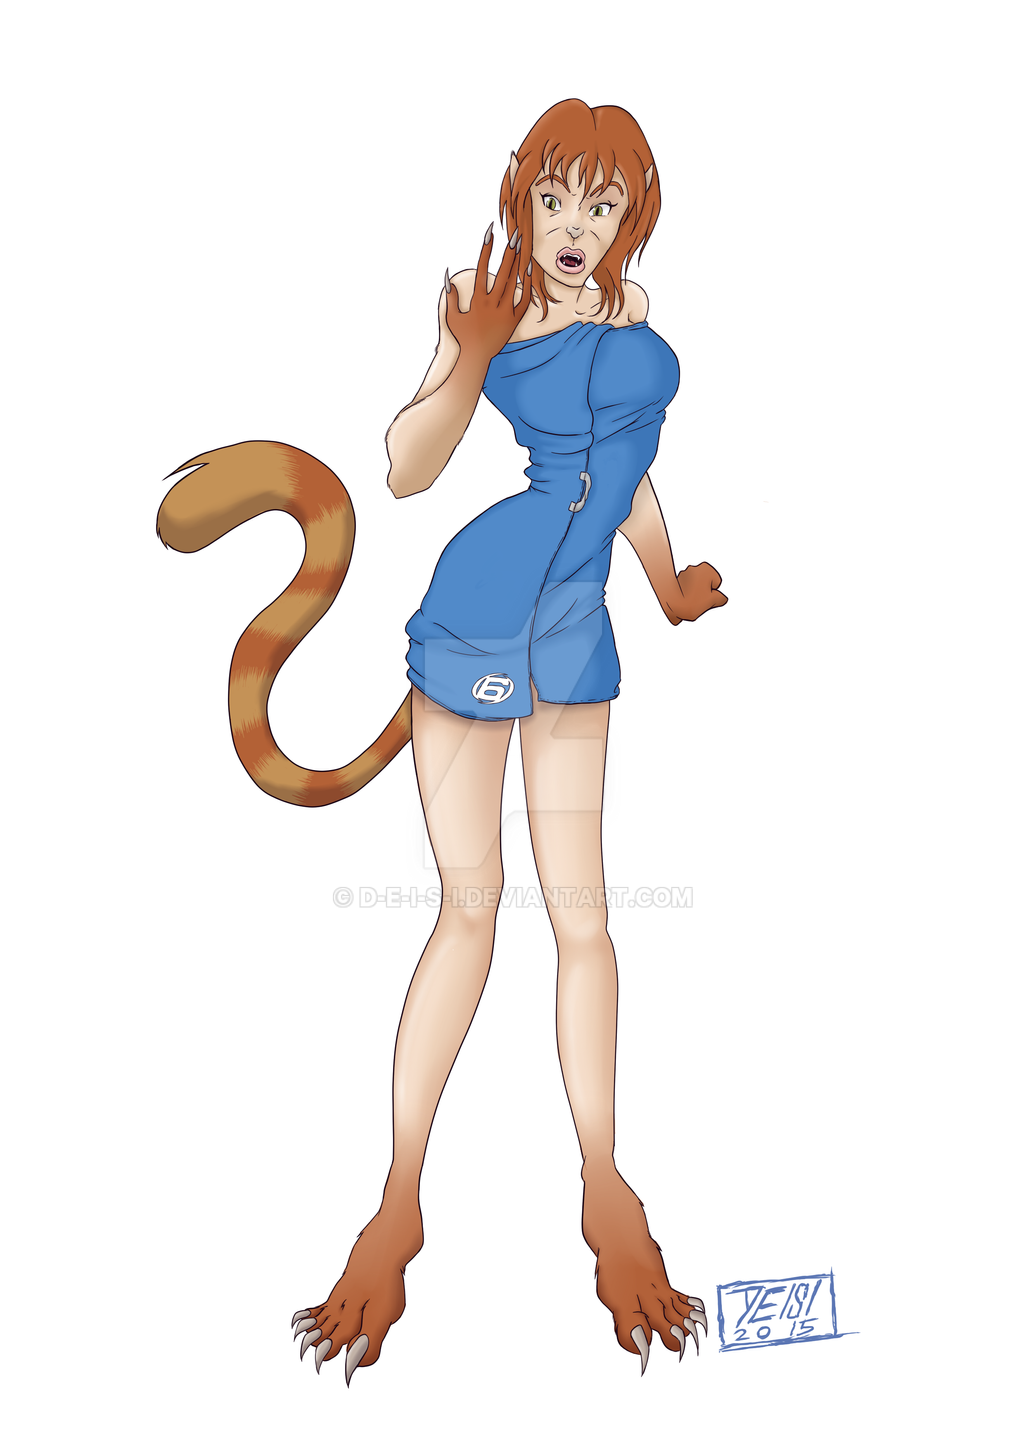 Commission - April - cat transformation by D-E-I-S-I on.